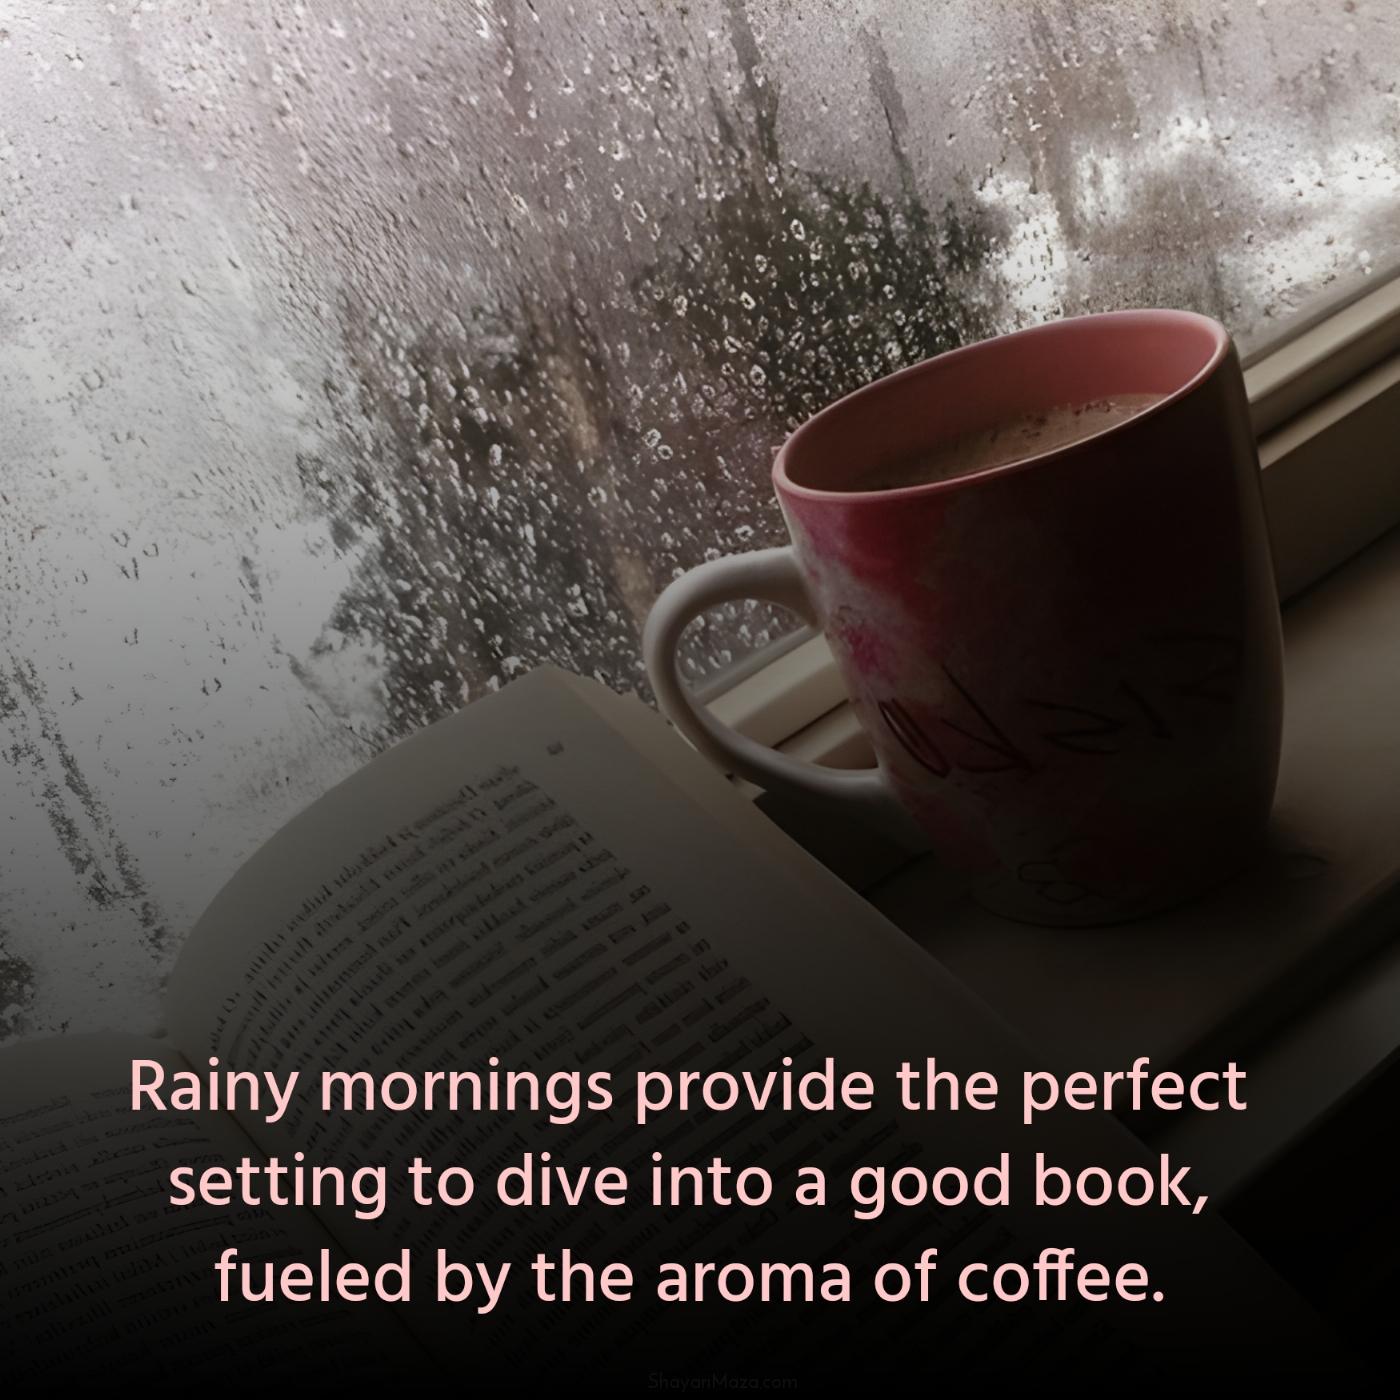 Rainy mornings provide the perfect setting to dive into a good book